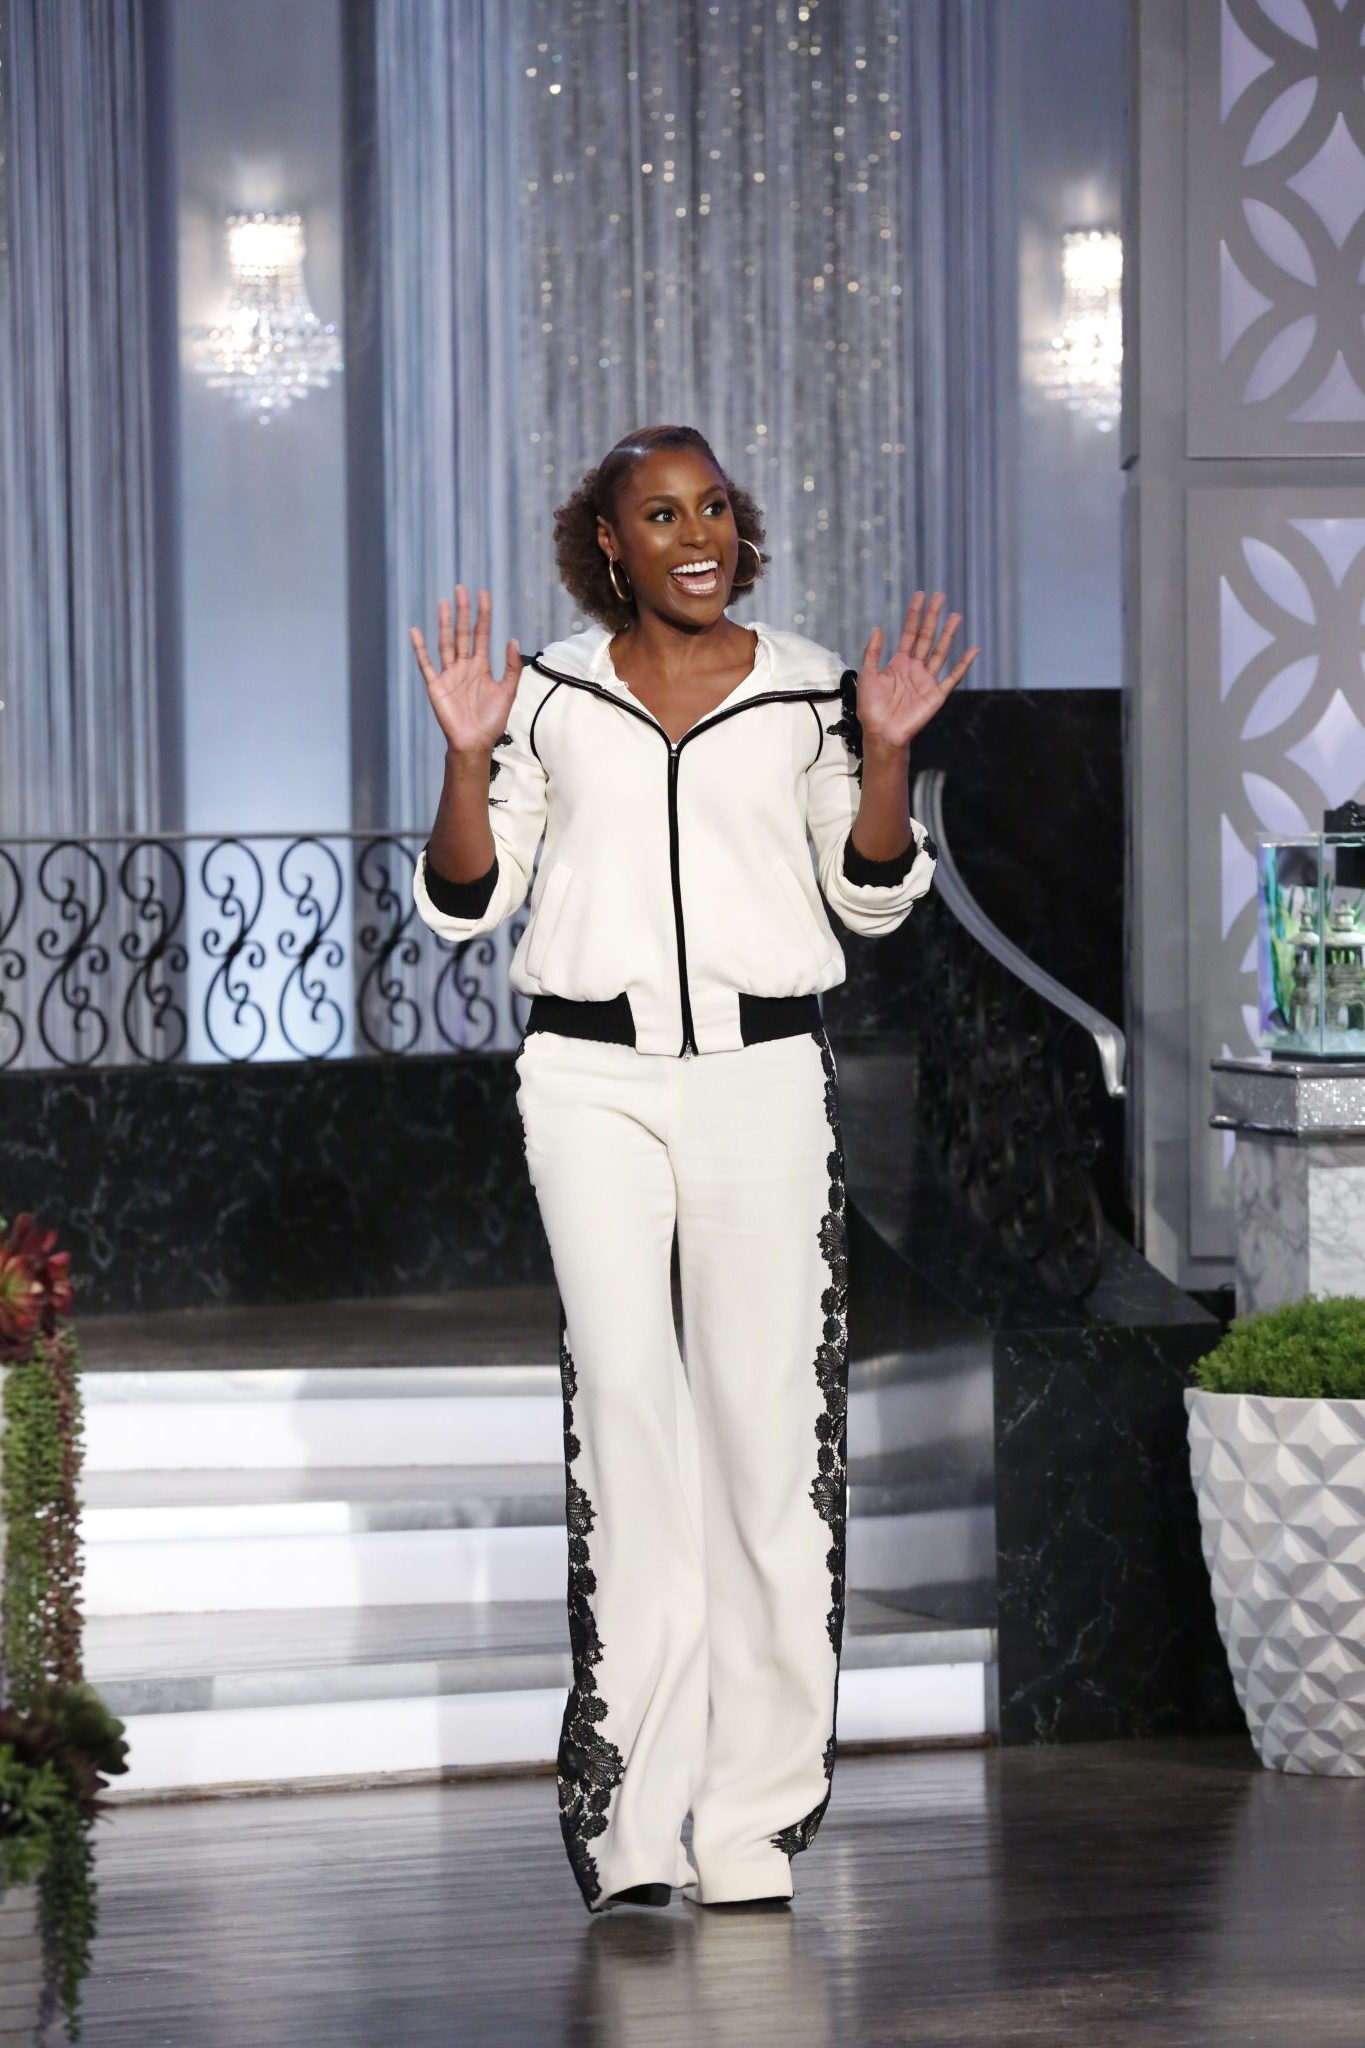 The Real Welcomes Issa Rae And Brings Back The Girl Chat Wheel!